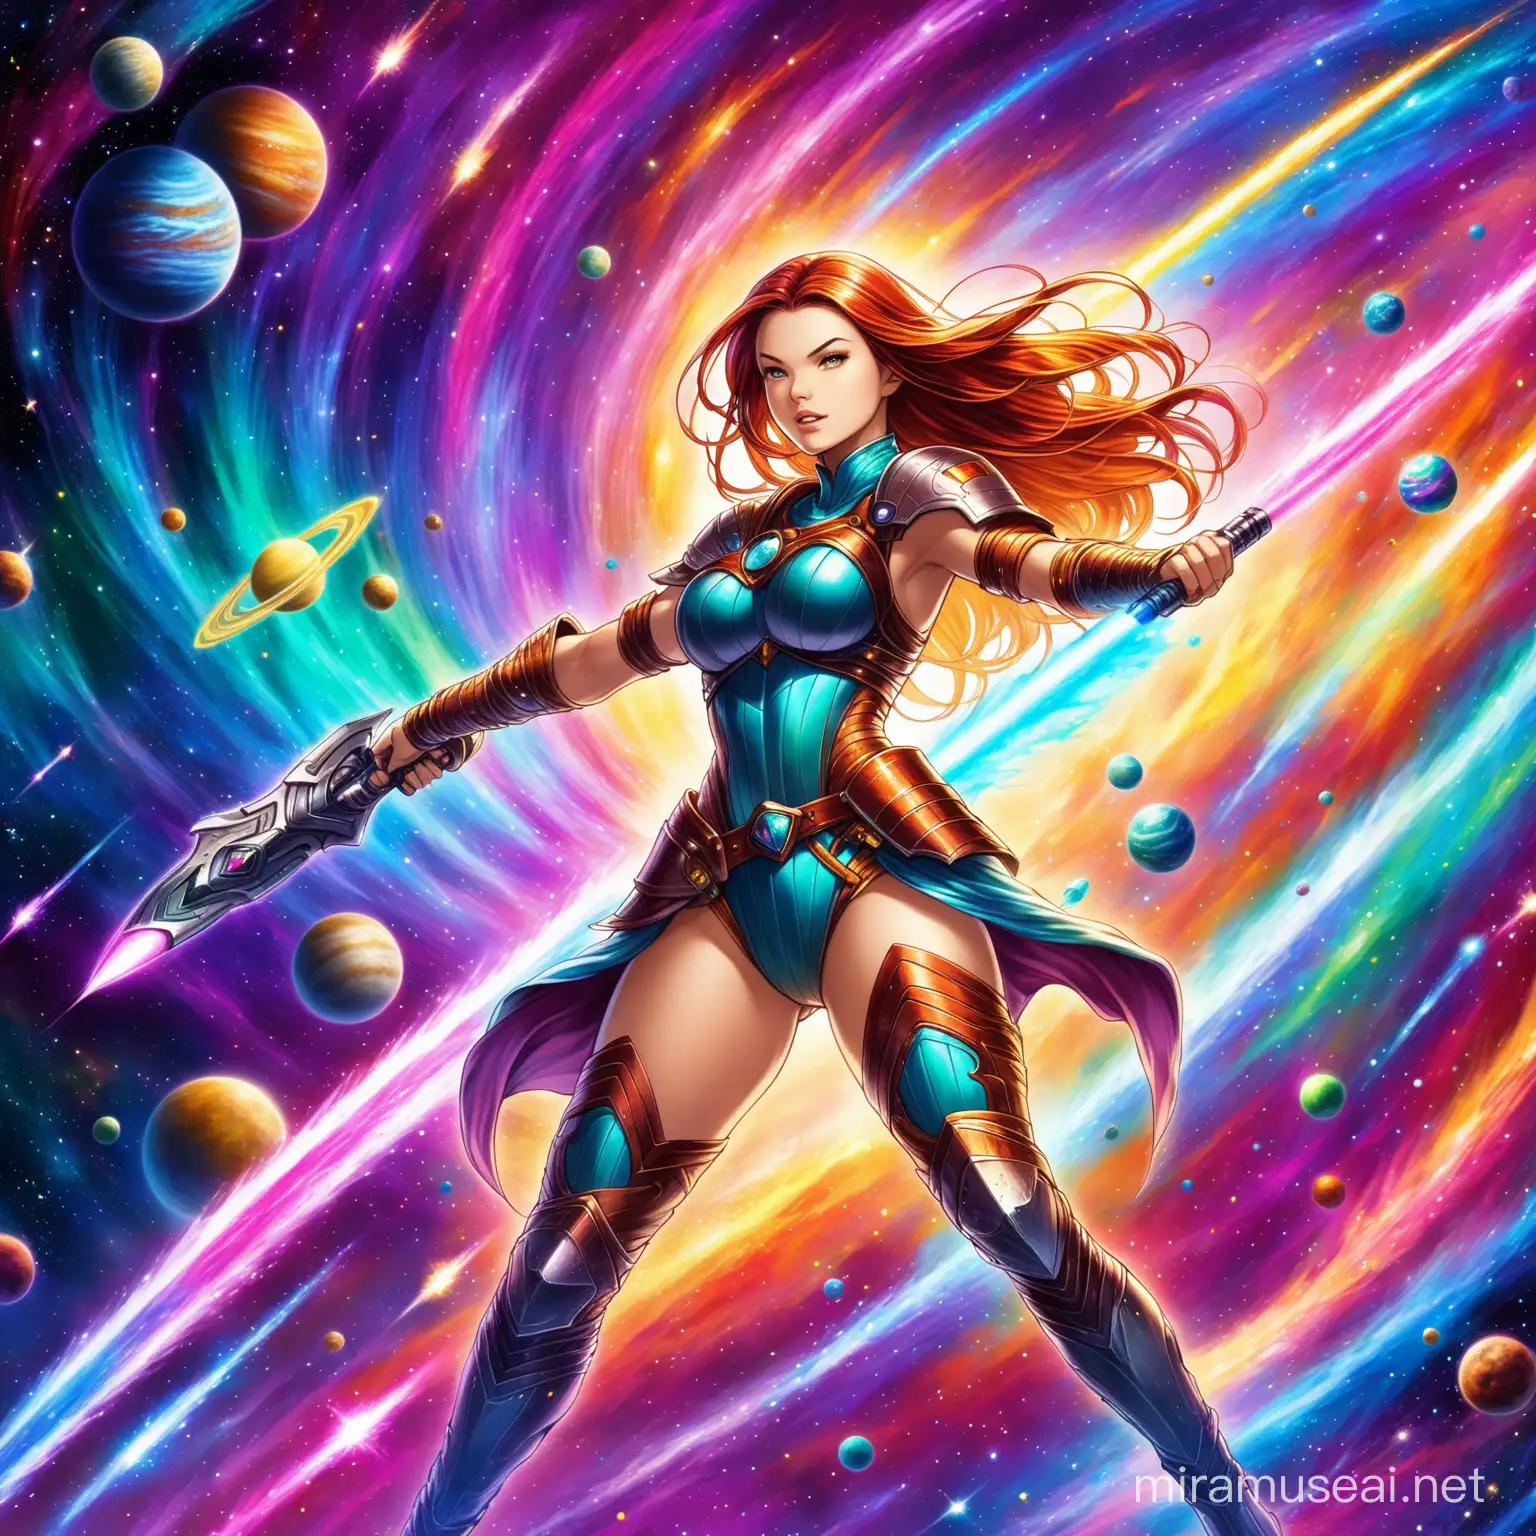 Vibrant Warrior Princess in Space Spectacular Galactic Adventure